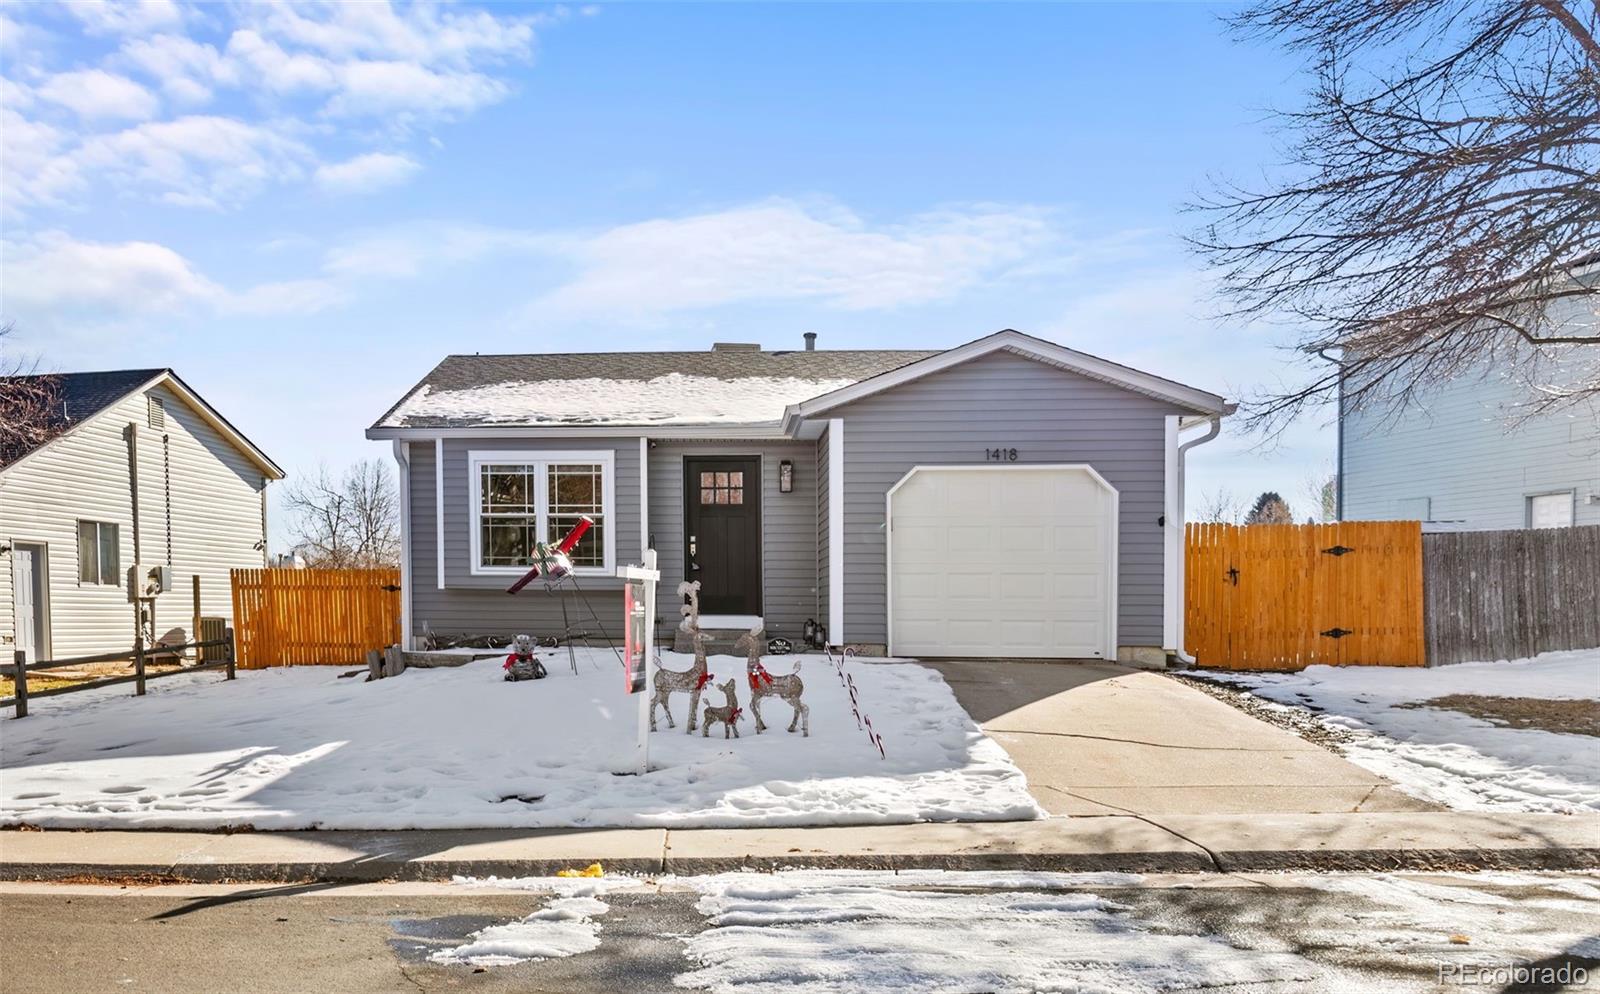 1418 s biscay way, Aurora sold home. Closed on 2024-02-09 for $475,000.